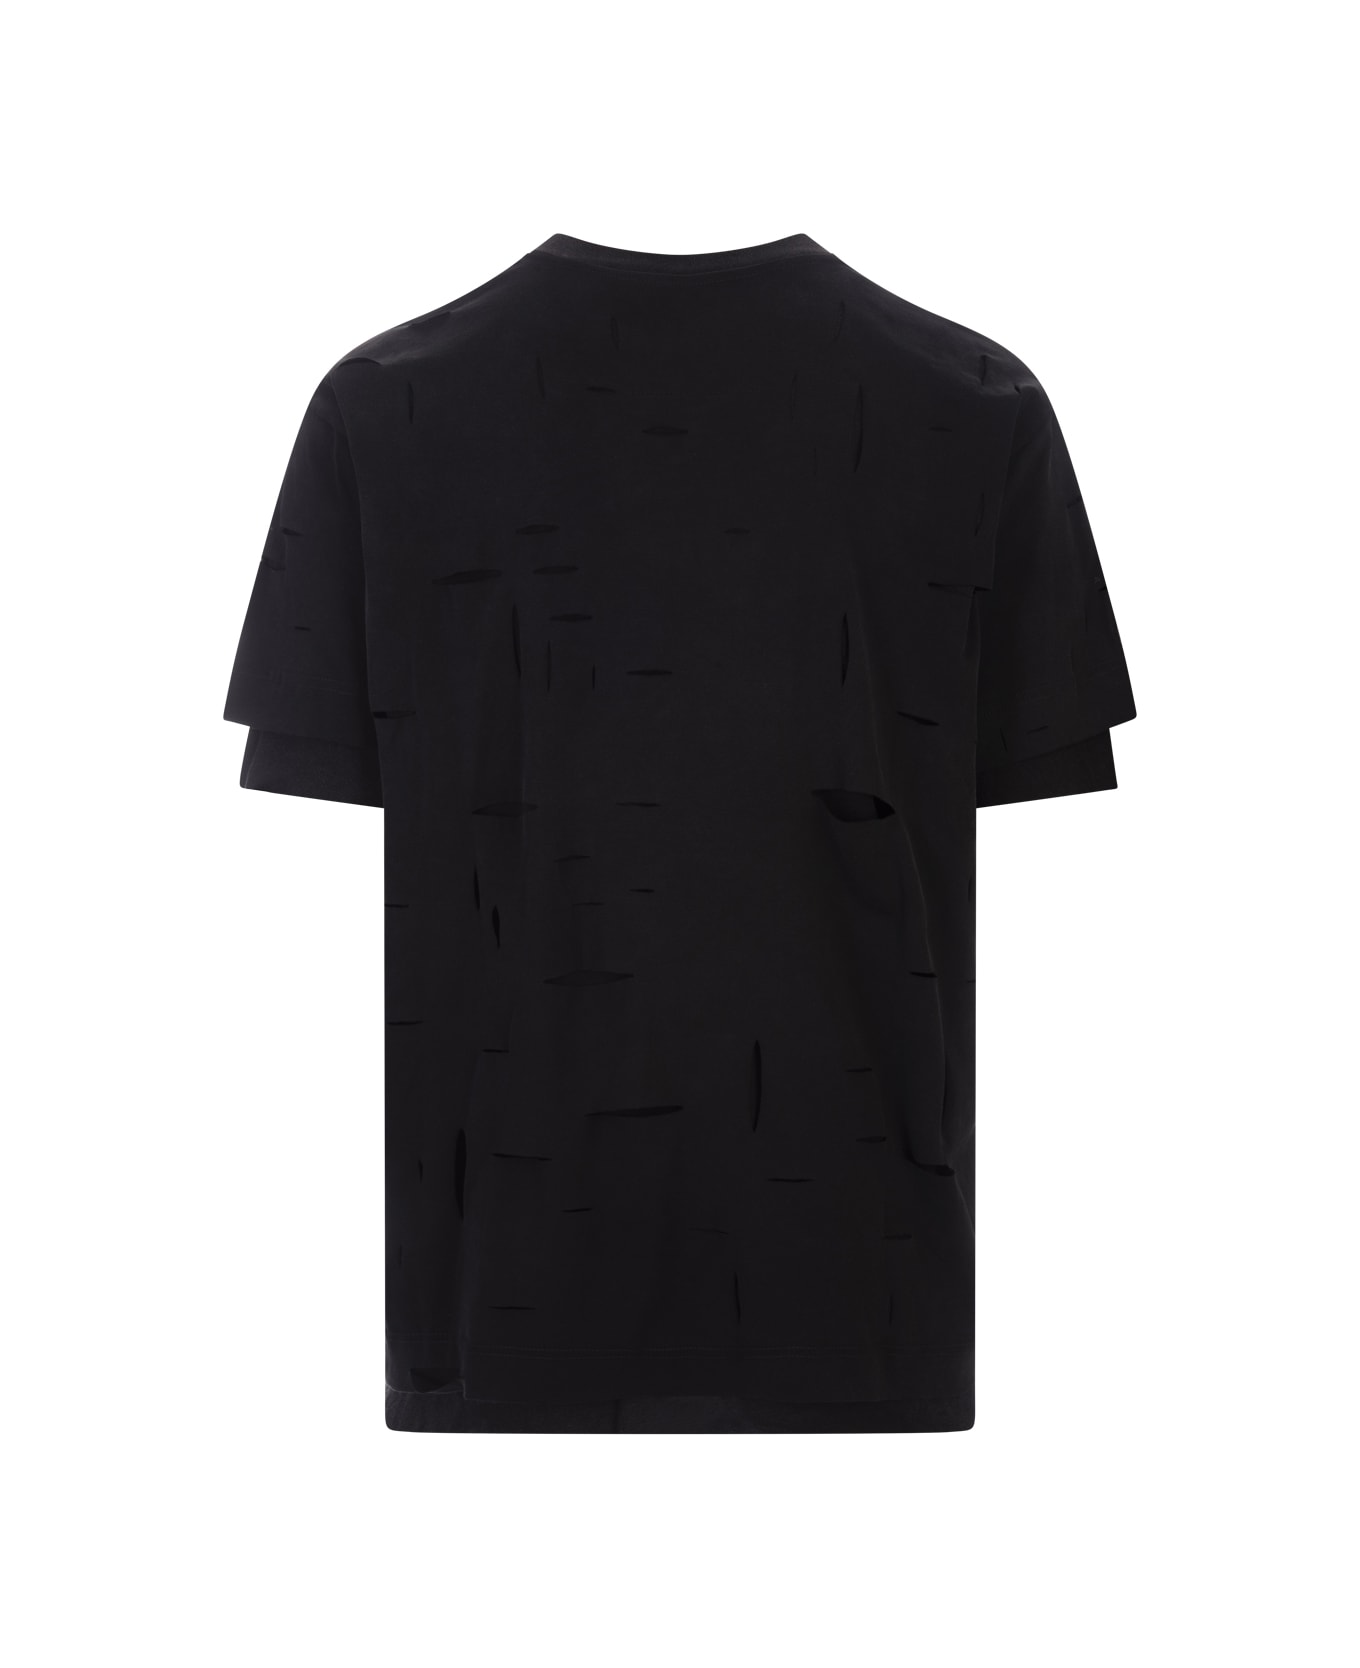 Givenchy Black Destroyed T-shirt With Logo - Black